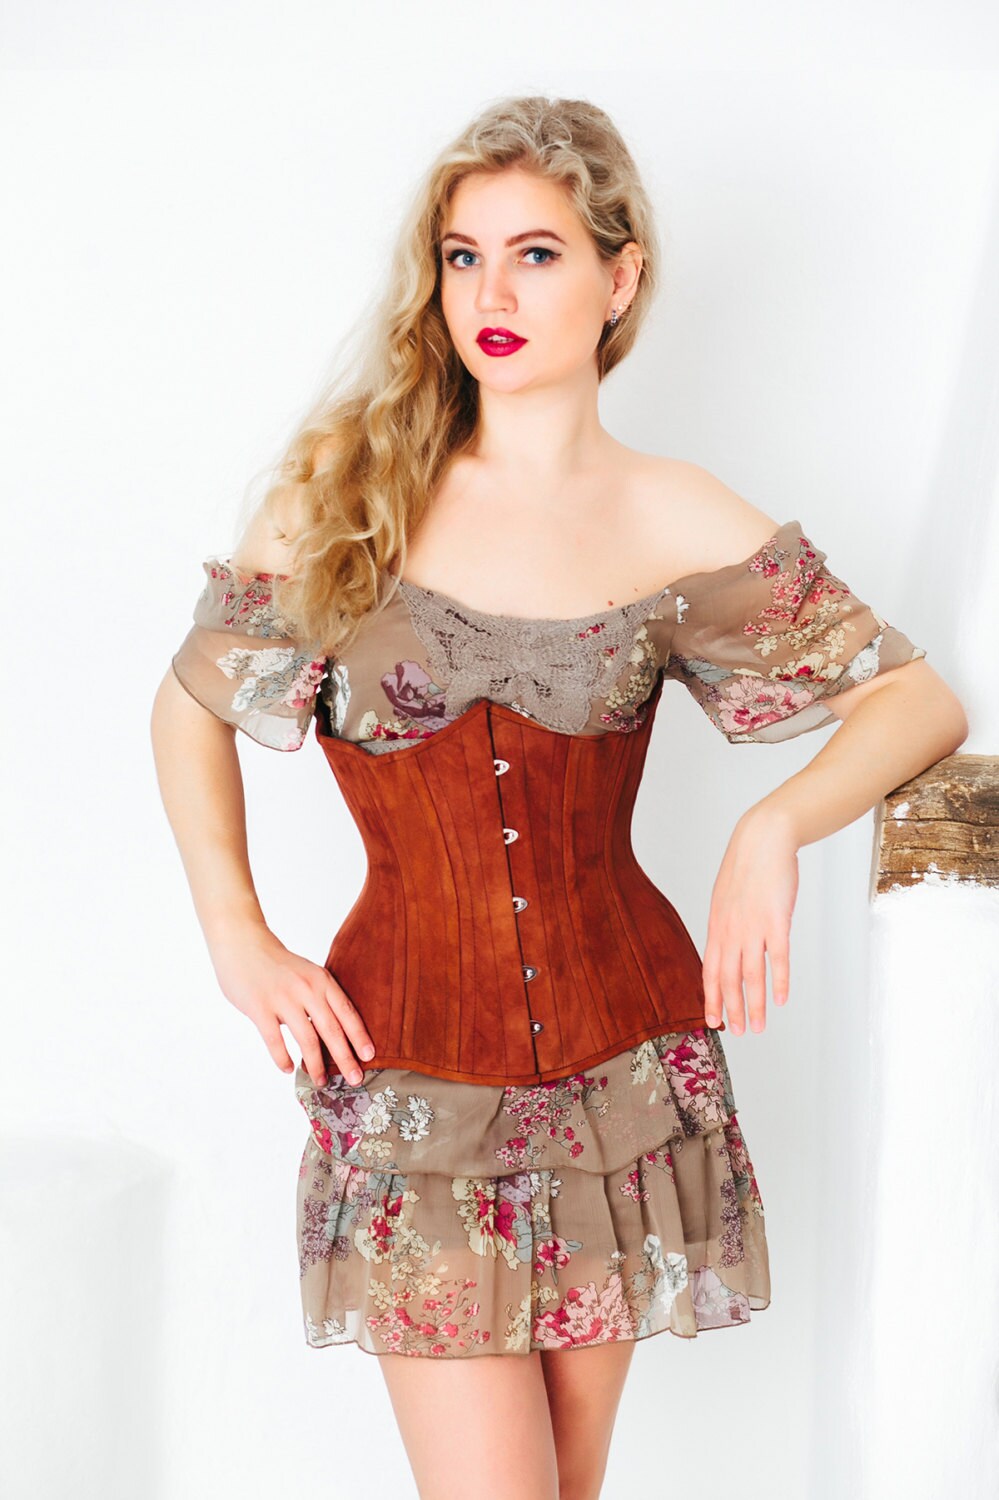 Real Double Row Steel Boned Underbust Corset From Real Brown Suede. Exclusive  Steampunk Historical Corset With Double Rows of Bones. 